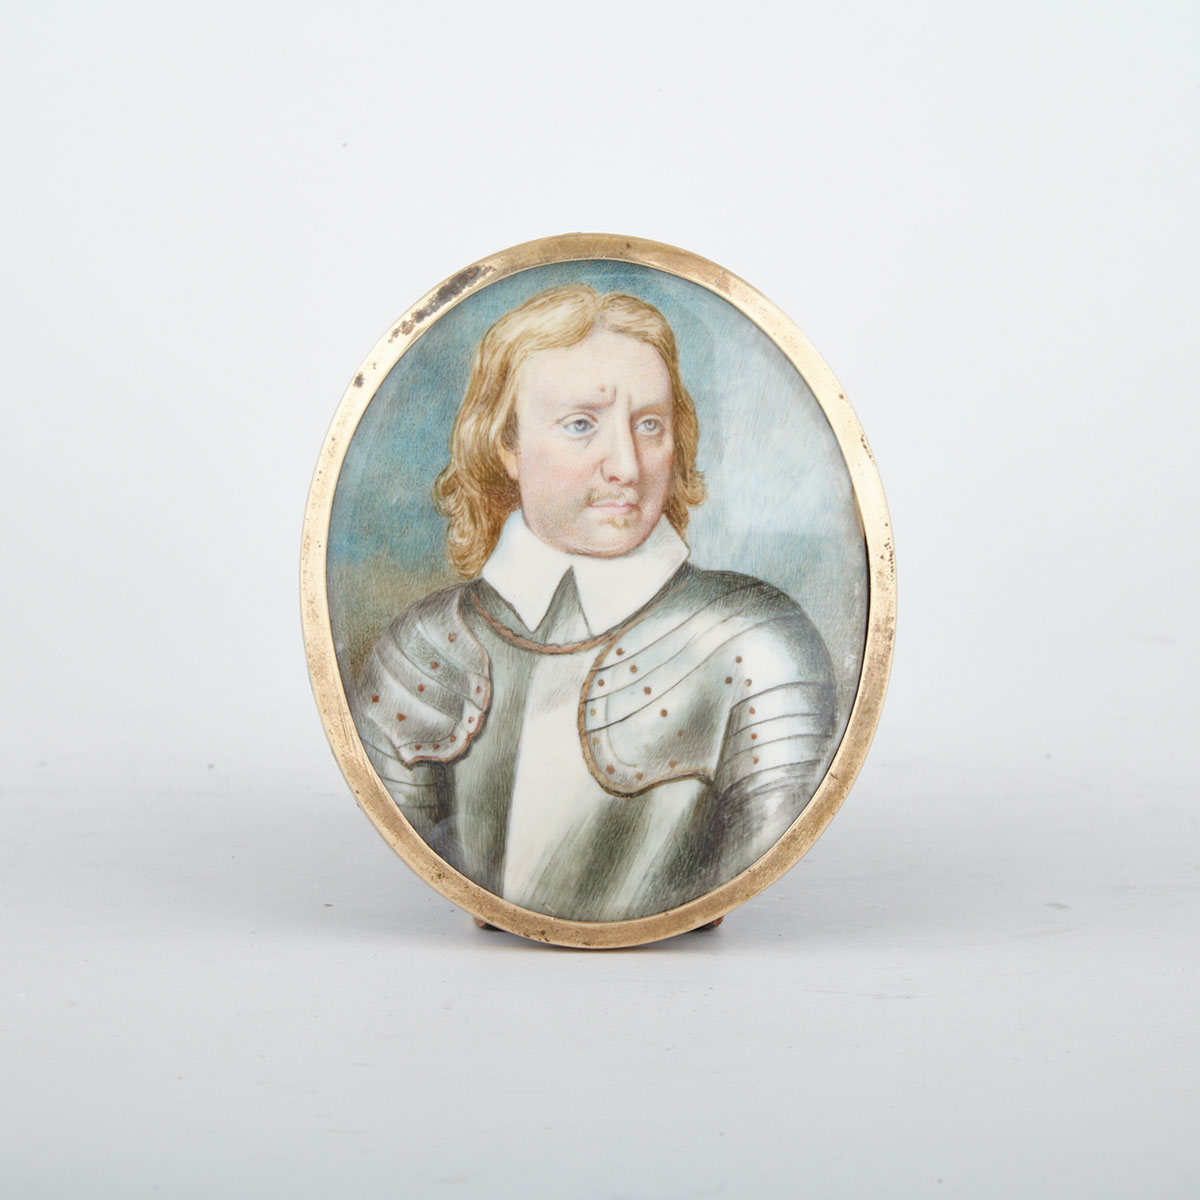 Portrait Miniature of Oliver Cromwell, after the work by Samuel Cooper (British, 1609-1672), 1791